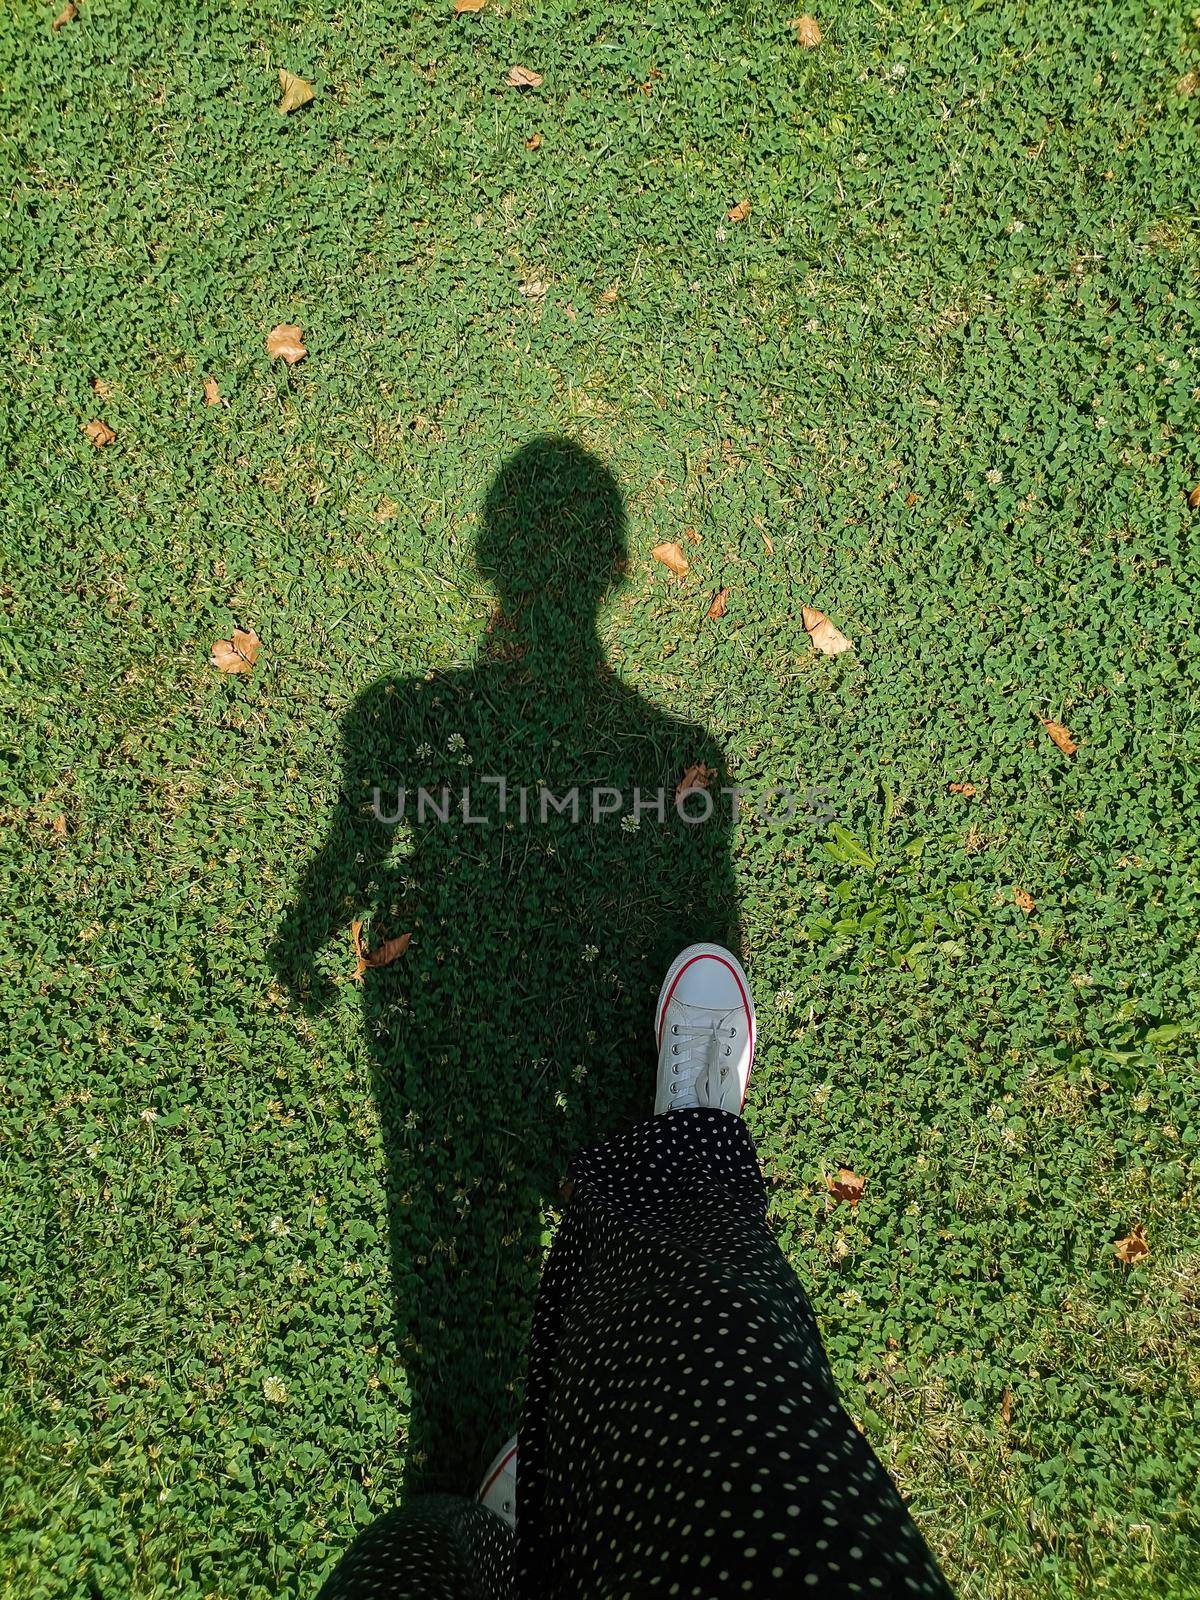 The shadow of a girl on the lawn. The girl is walking on the lawn, top view of walking legs on the grass. White sneakers against the background of green blooming clover.